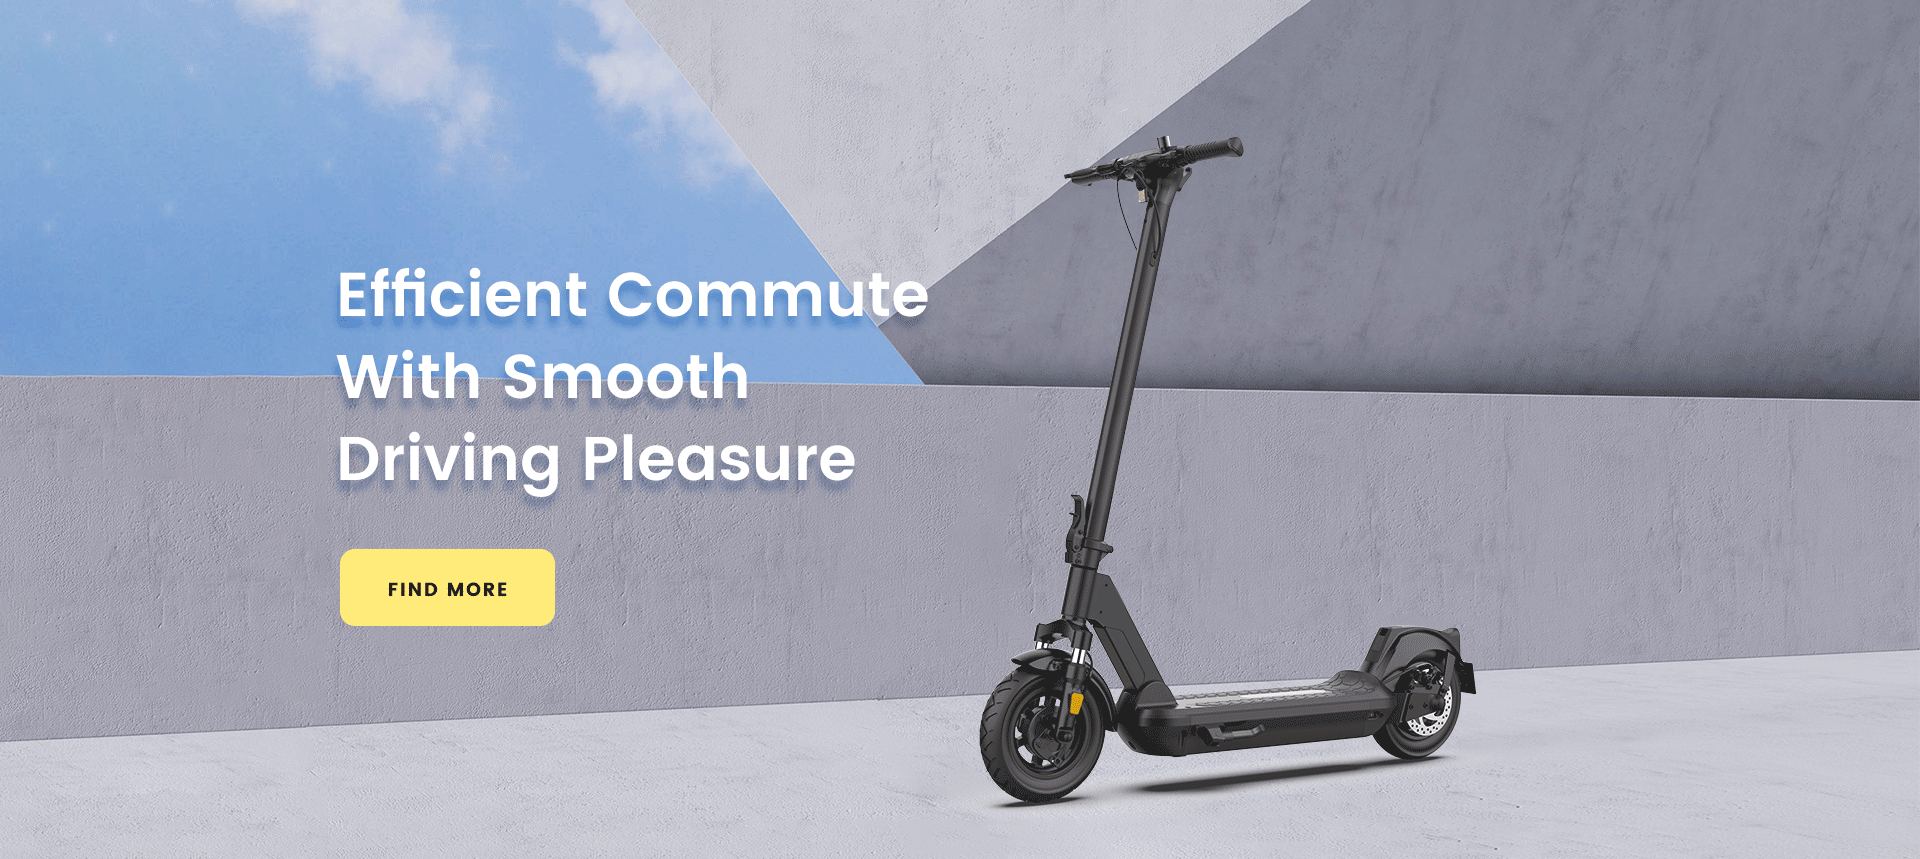 Efficient Commute With Smooth Driving Pleasure